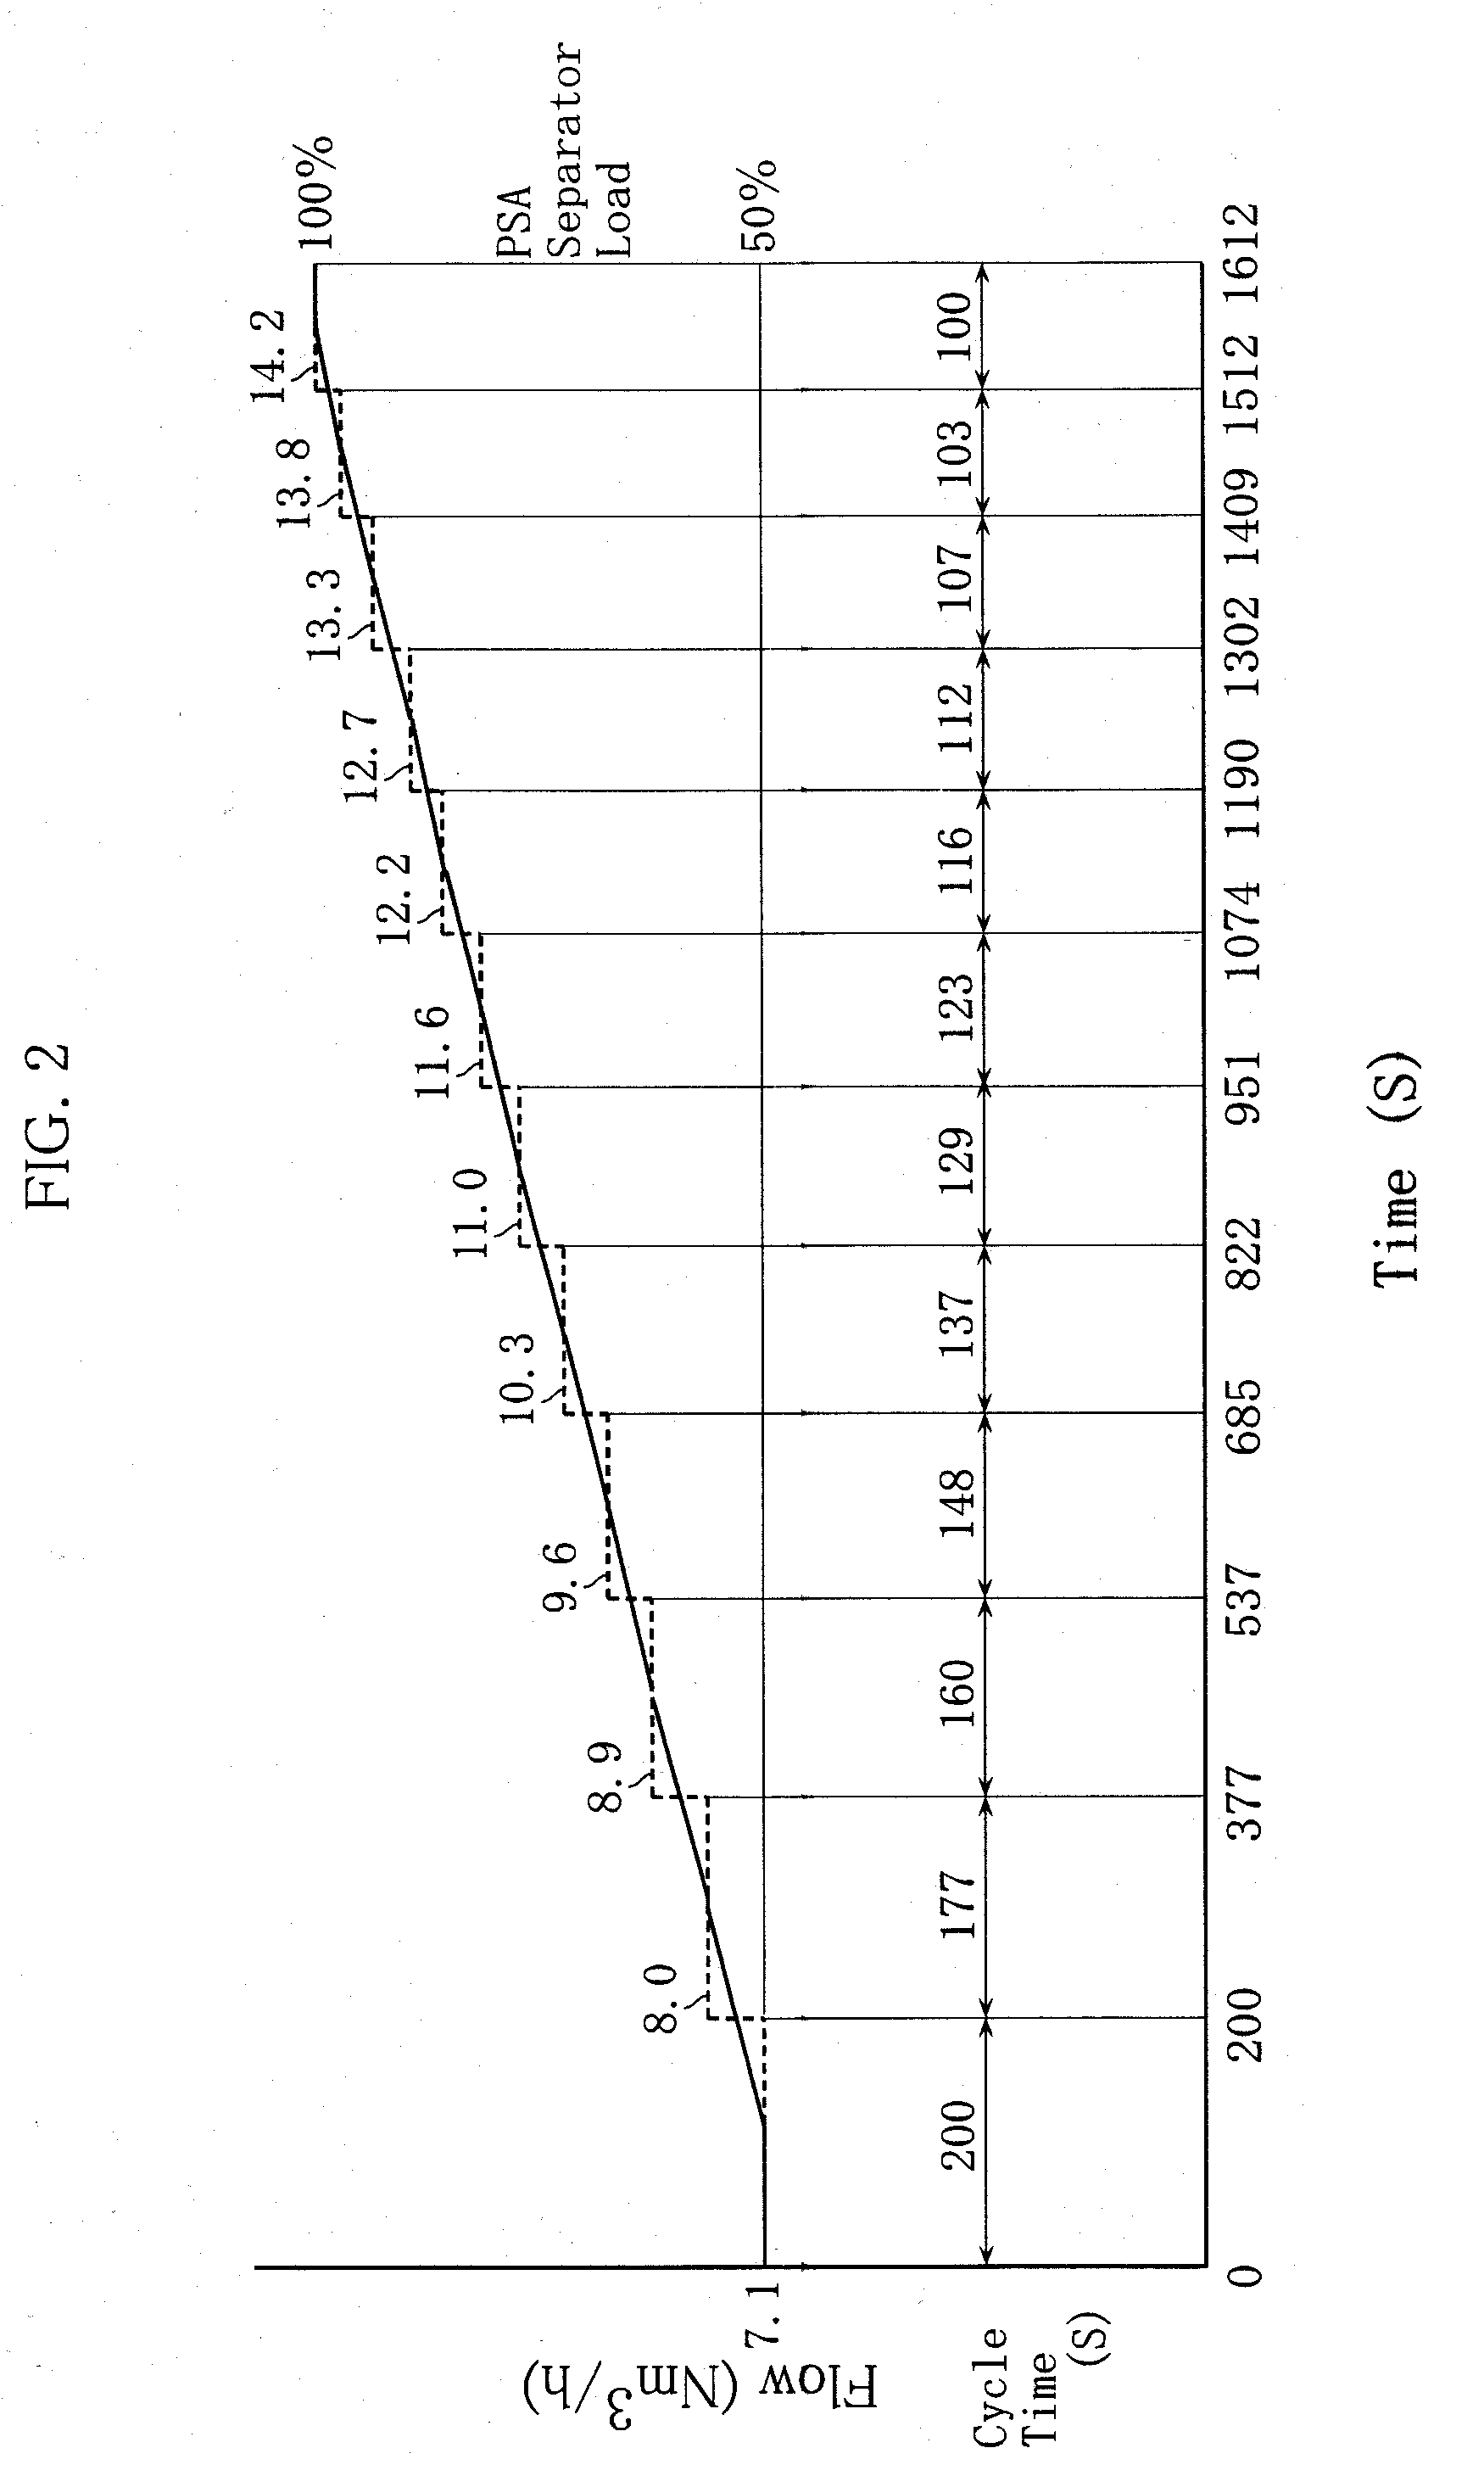 Hydrogen production system and method of controlling flow rate of offgas in the system